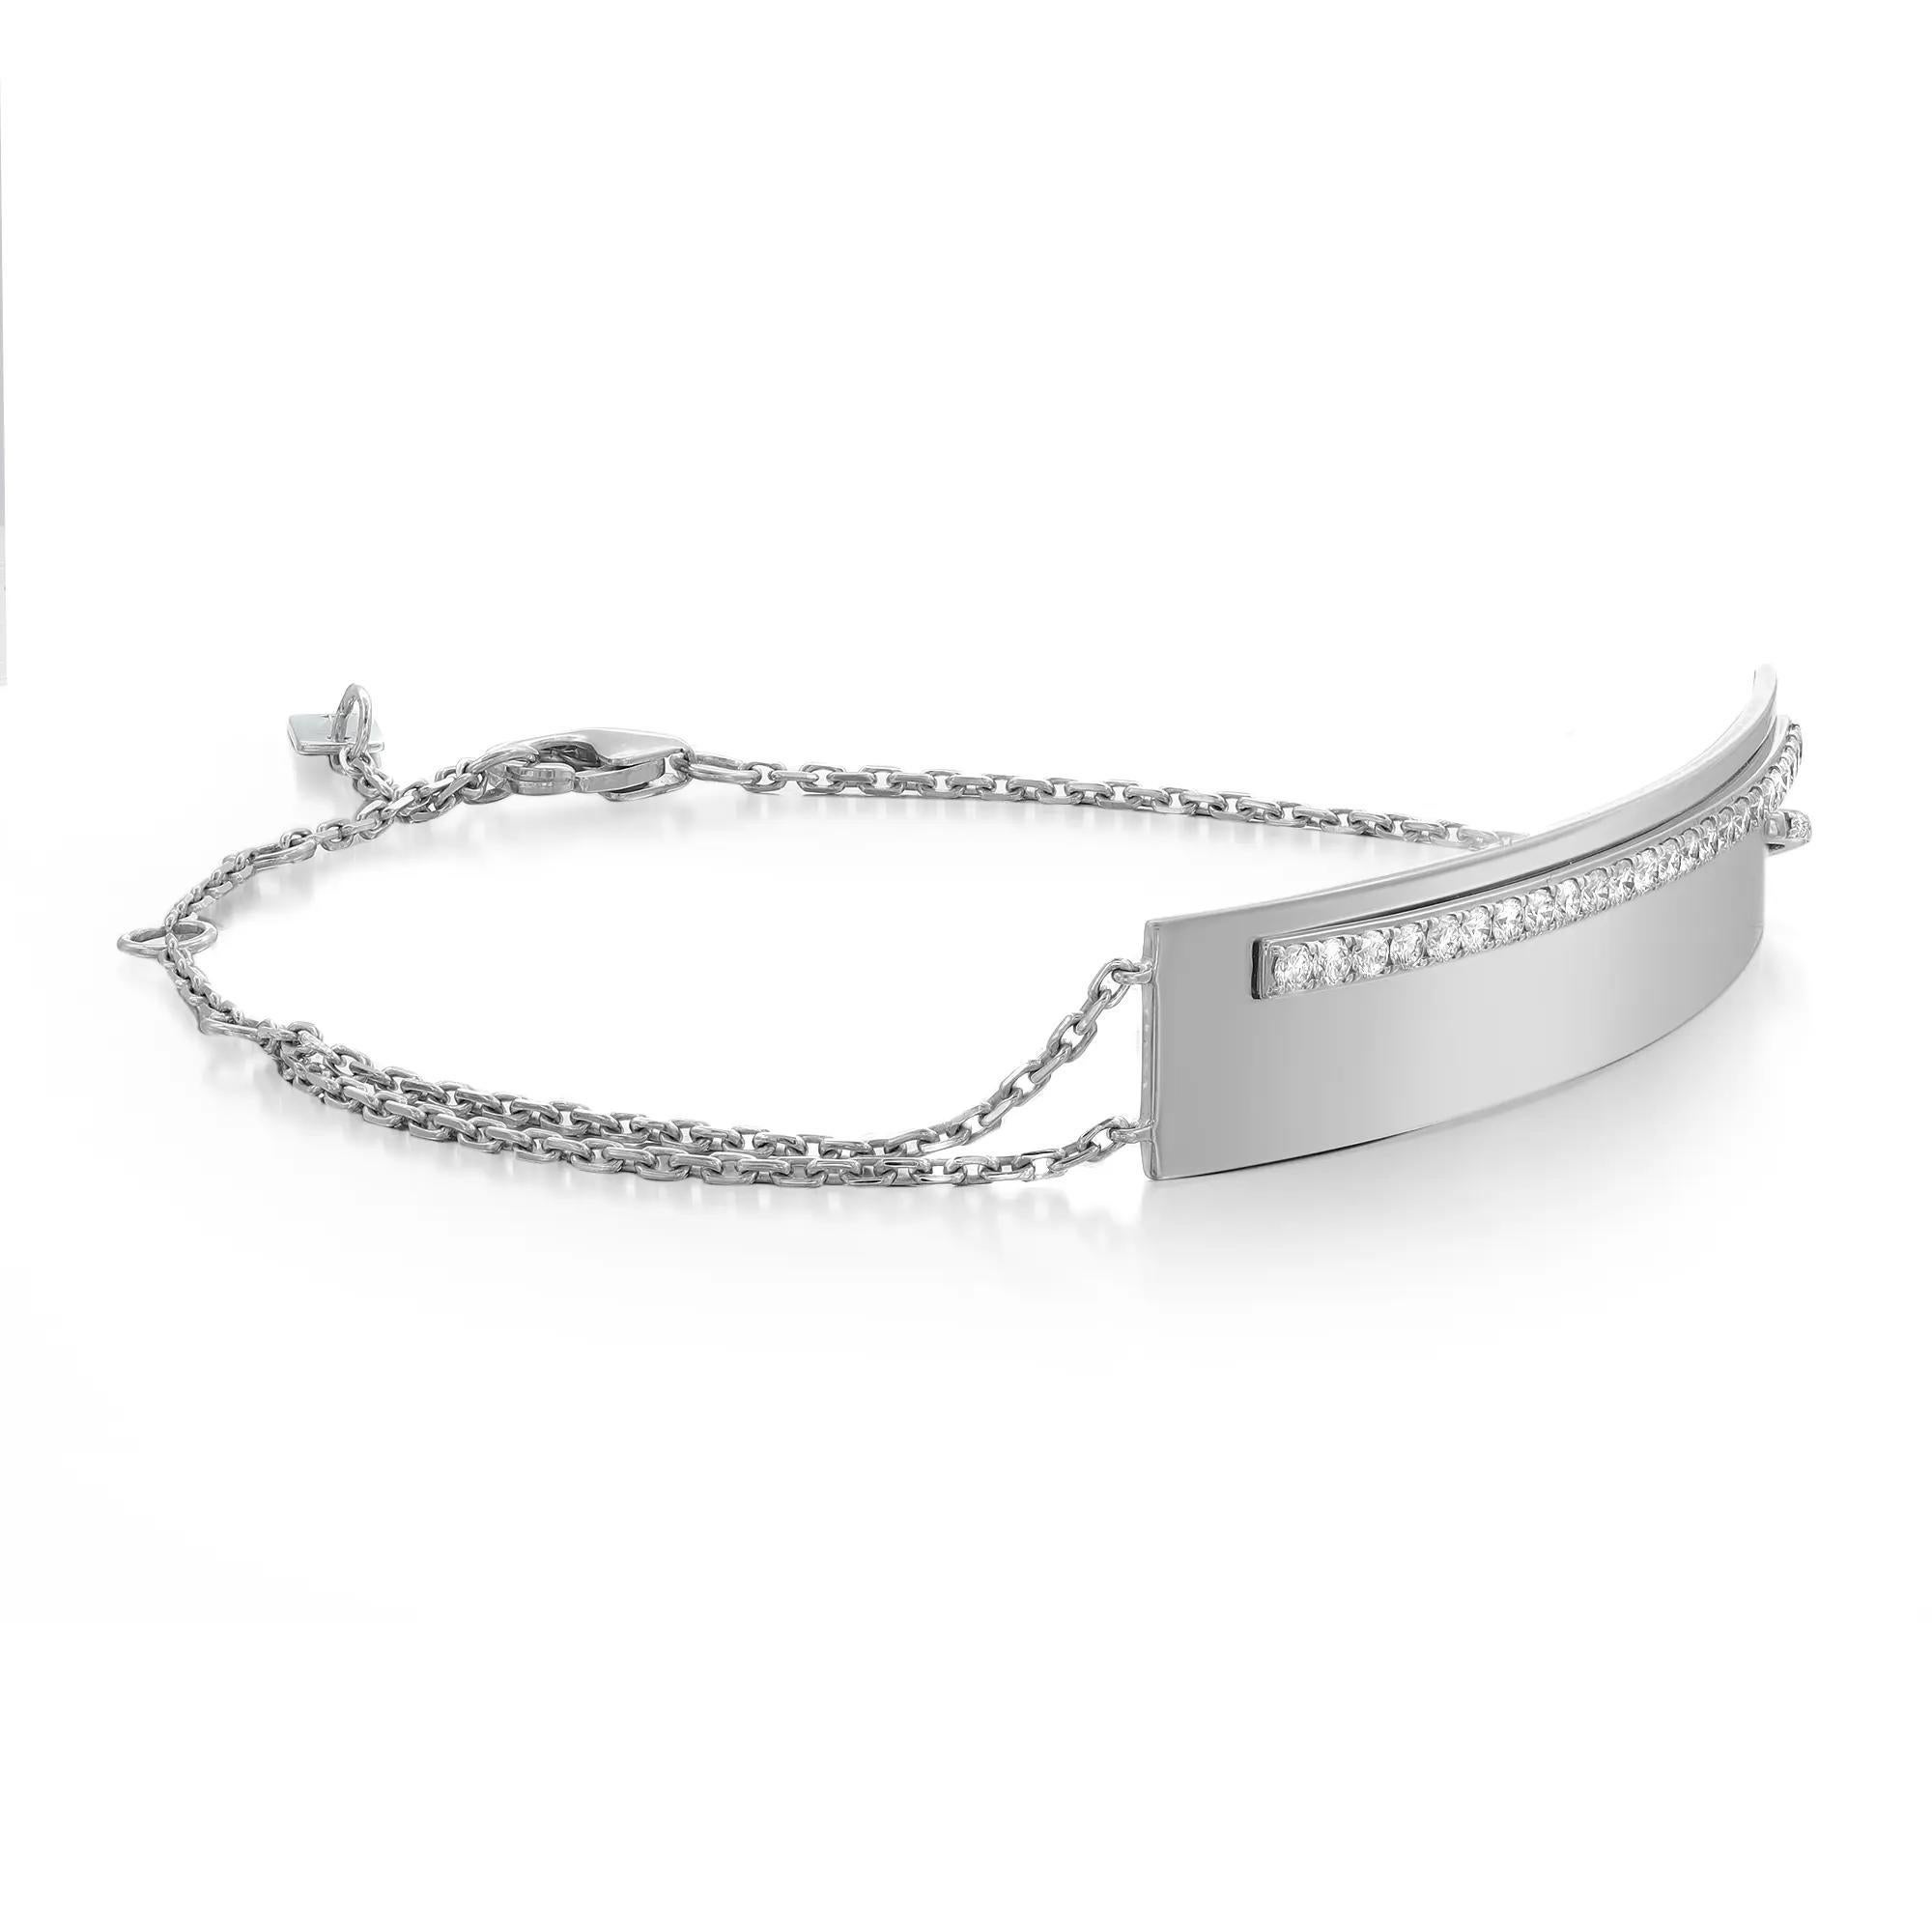 Make an elegant statement with this simple and appealing Messika Kate Sur Chaine diamond ID bracelet. Features a curved id tag at the center with a row of pave set round brilliant cut diamonds along with a curb Cuban link chain attached to a diamond